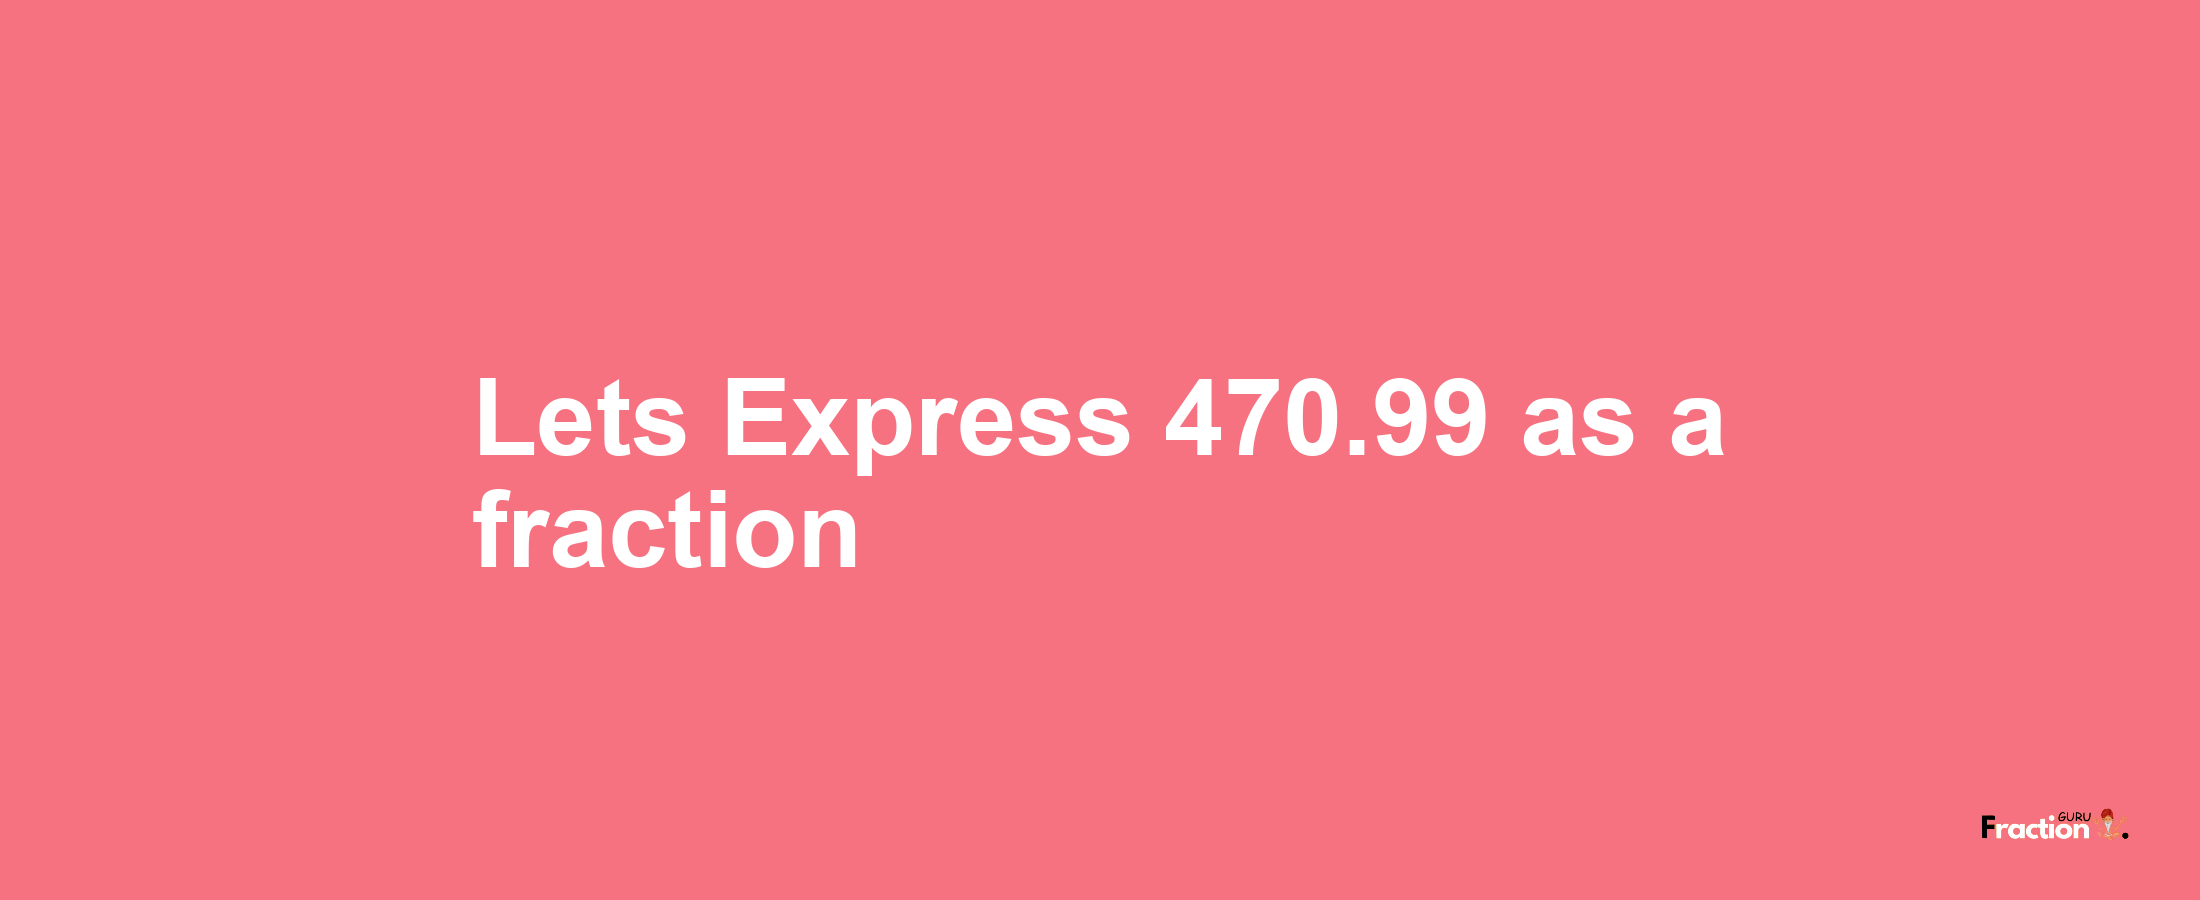 Lets Express 470.99 as afraction